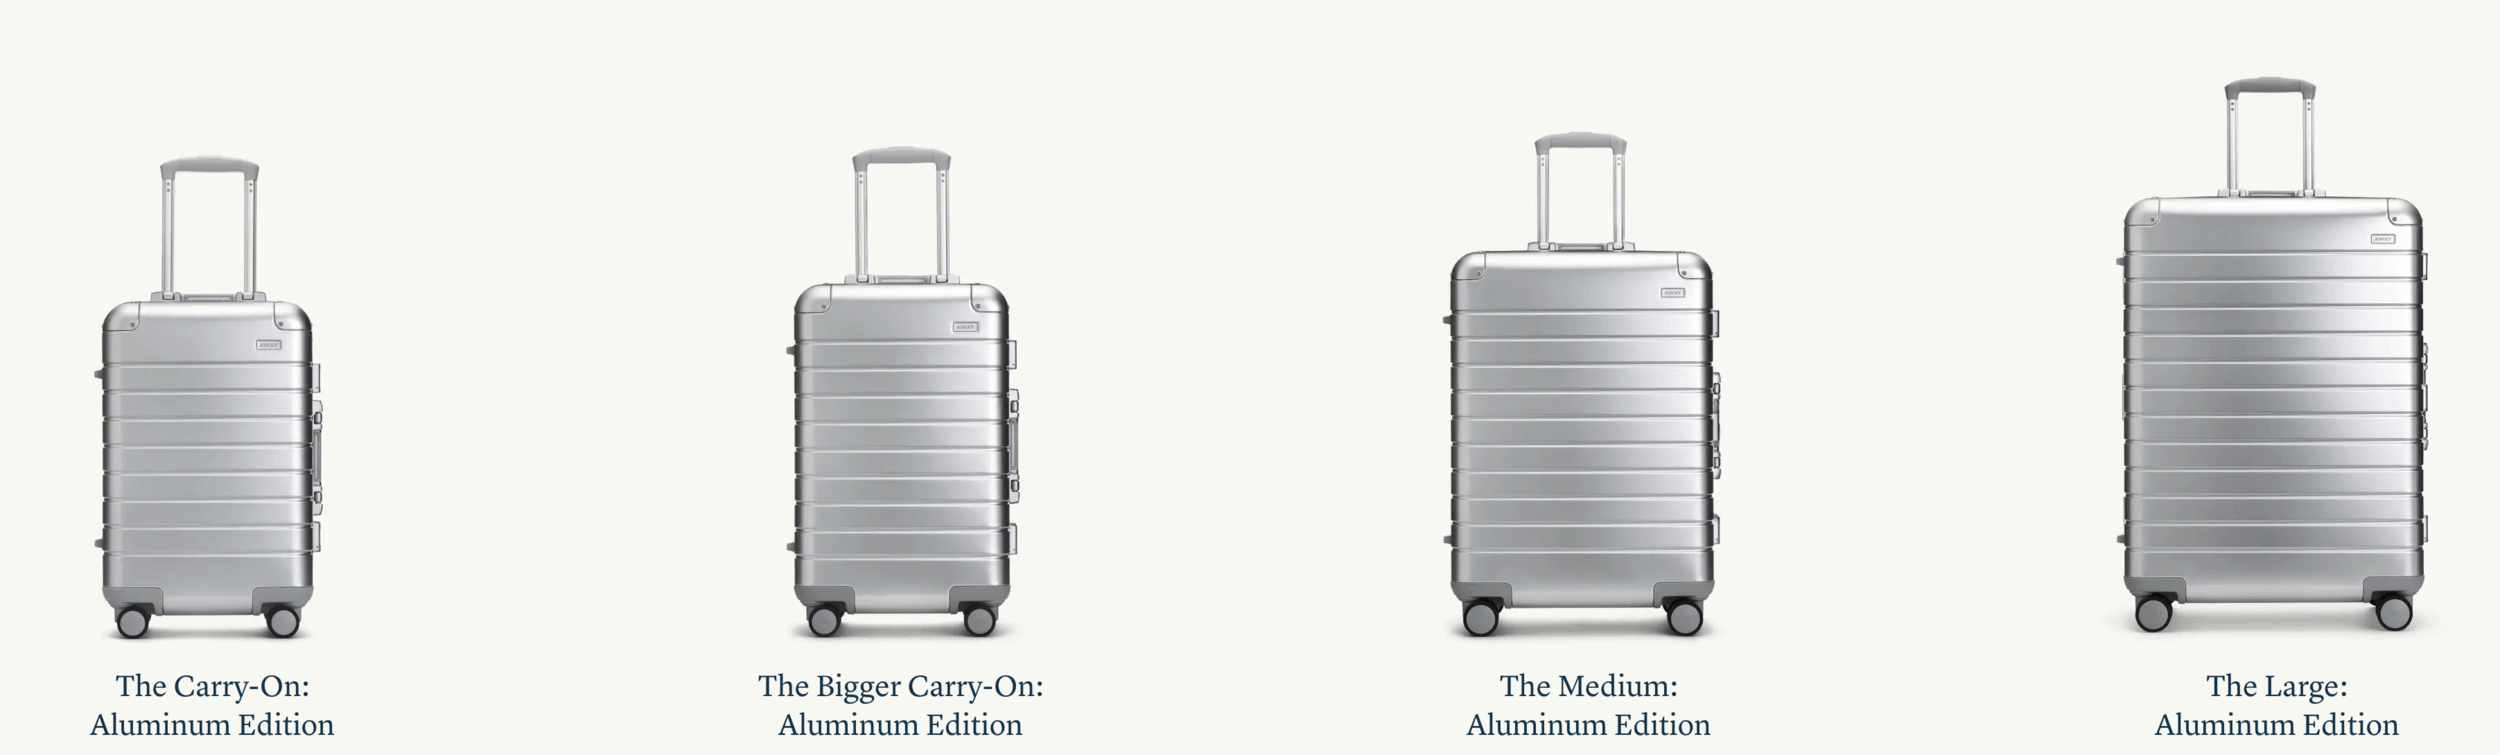 Away Travel suitcases and travel bags